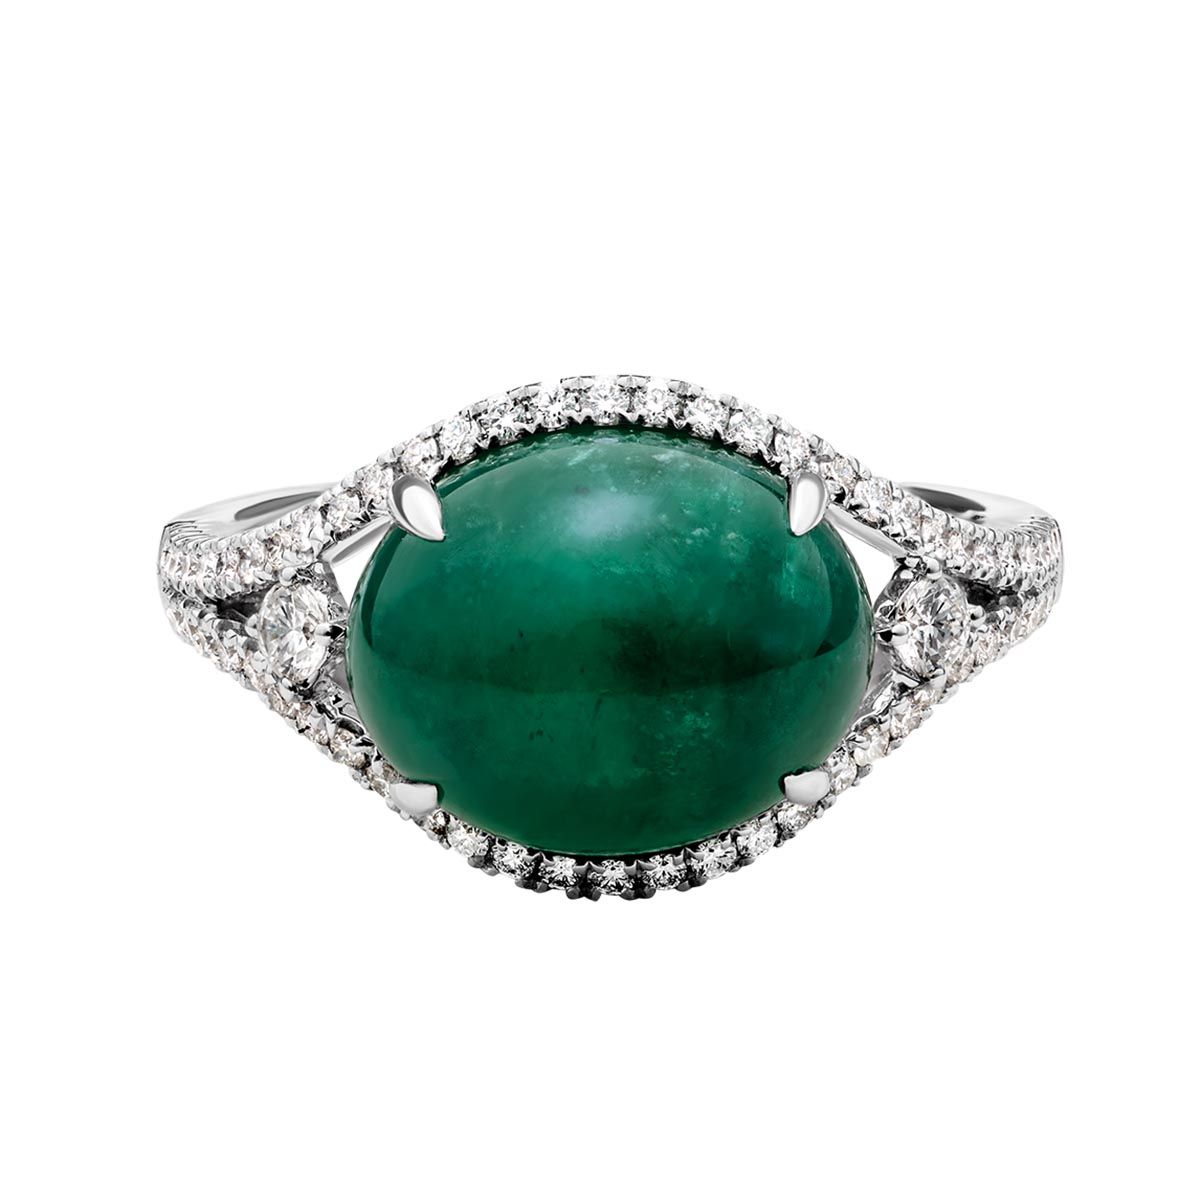 Oval Emerald Cabochon & Diamond Split Halo Ring In White Gold | Borsheims Within Emerald Cabochon Halo Rings (View 11 of 25)